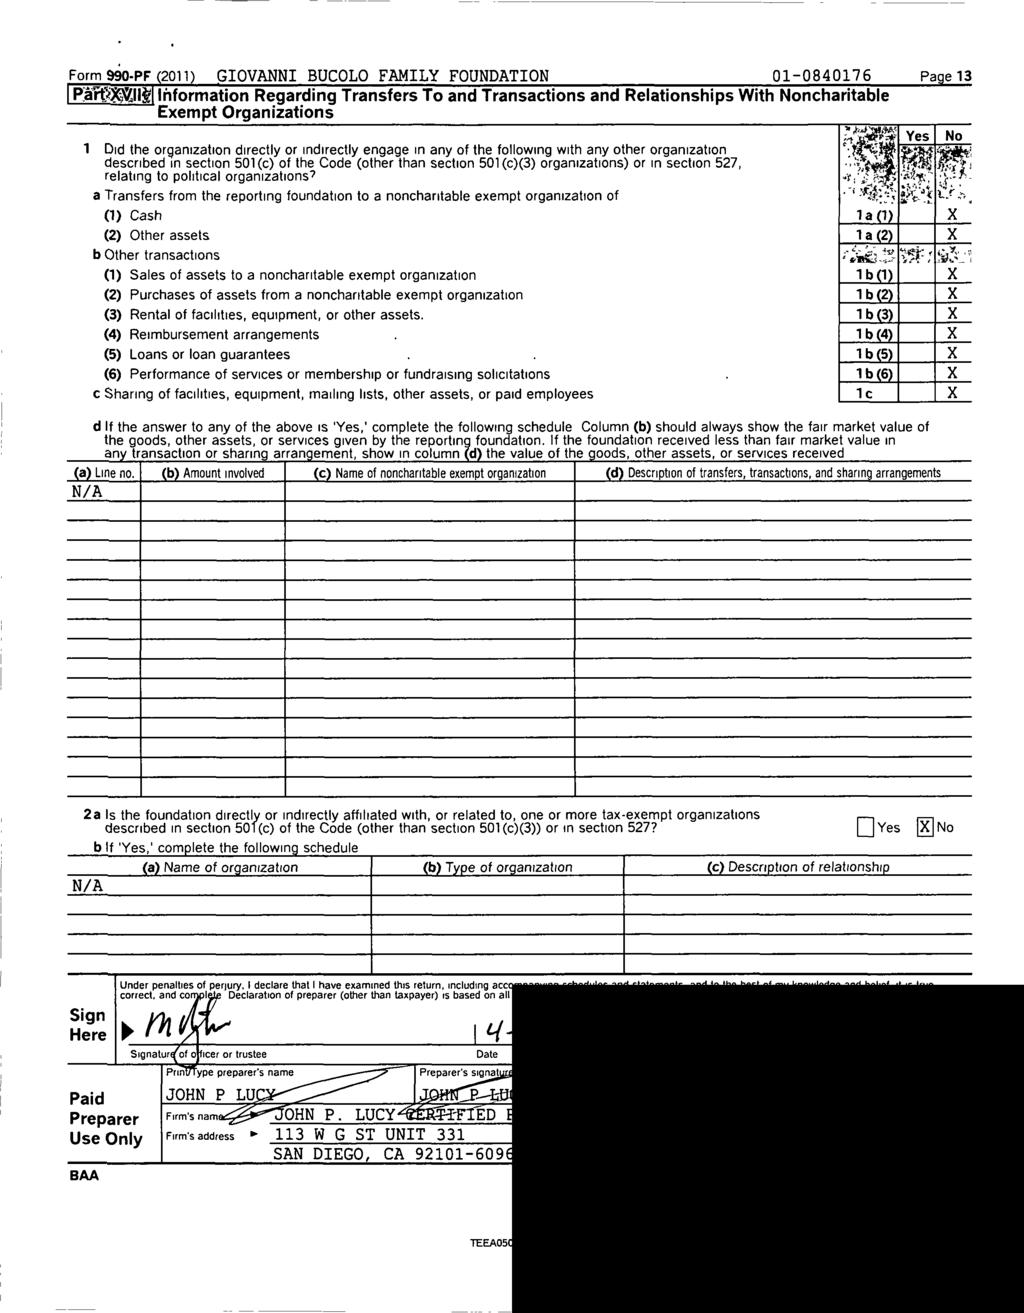 Form 990-PF 2011) GIOVANNI BUCOLO FAMILY FOUNDATION 01-0840176 Pa g e 13 PartX,VII Information Regarding Transfers To and Transactions and Relationships With Noncharitable Exempt Organizations -n '1=